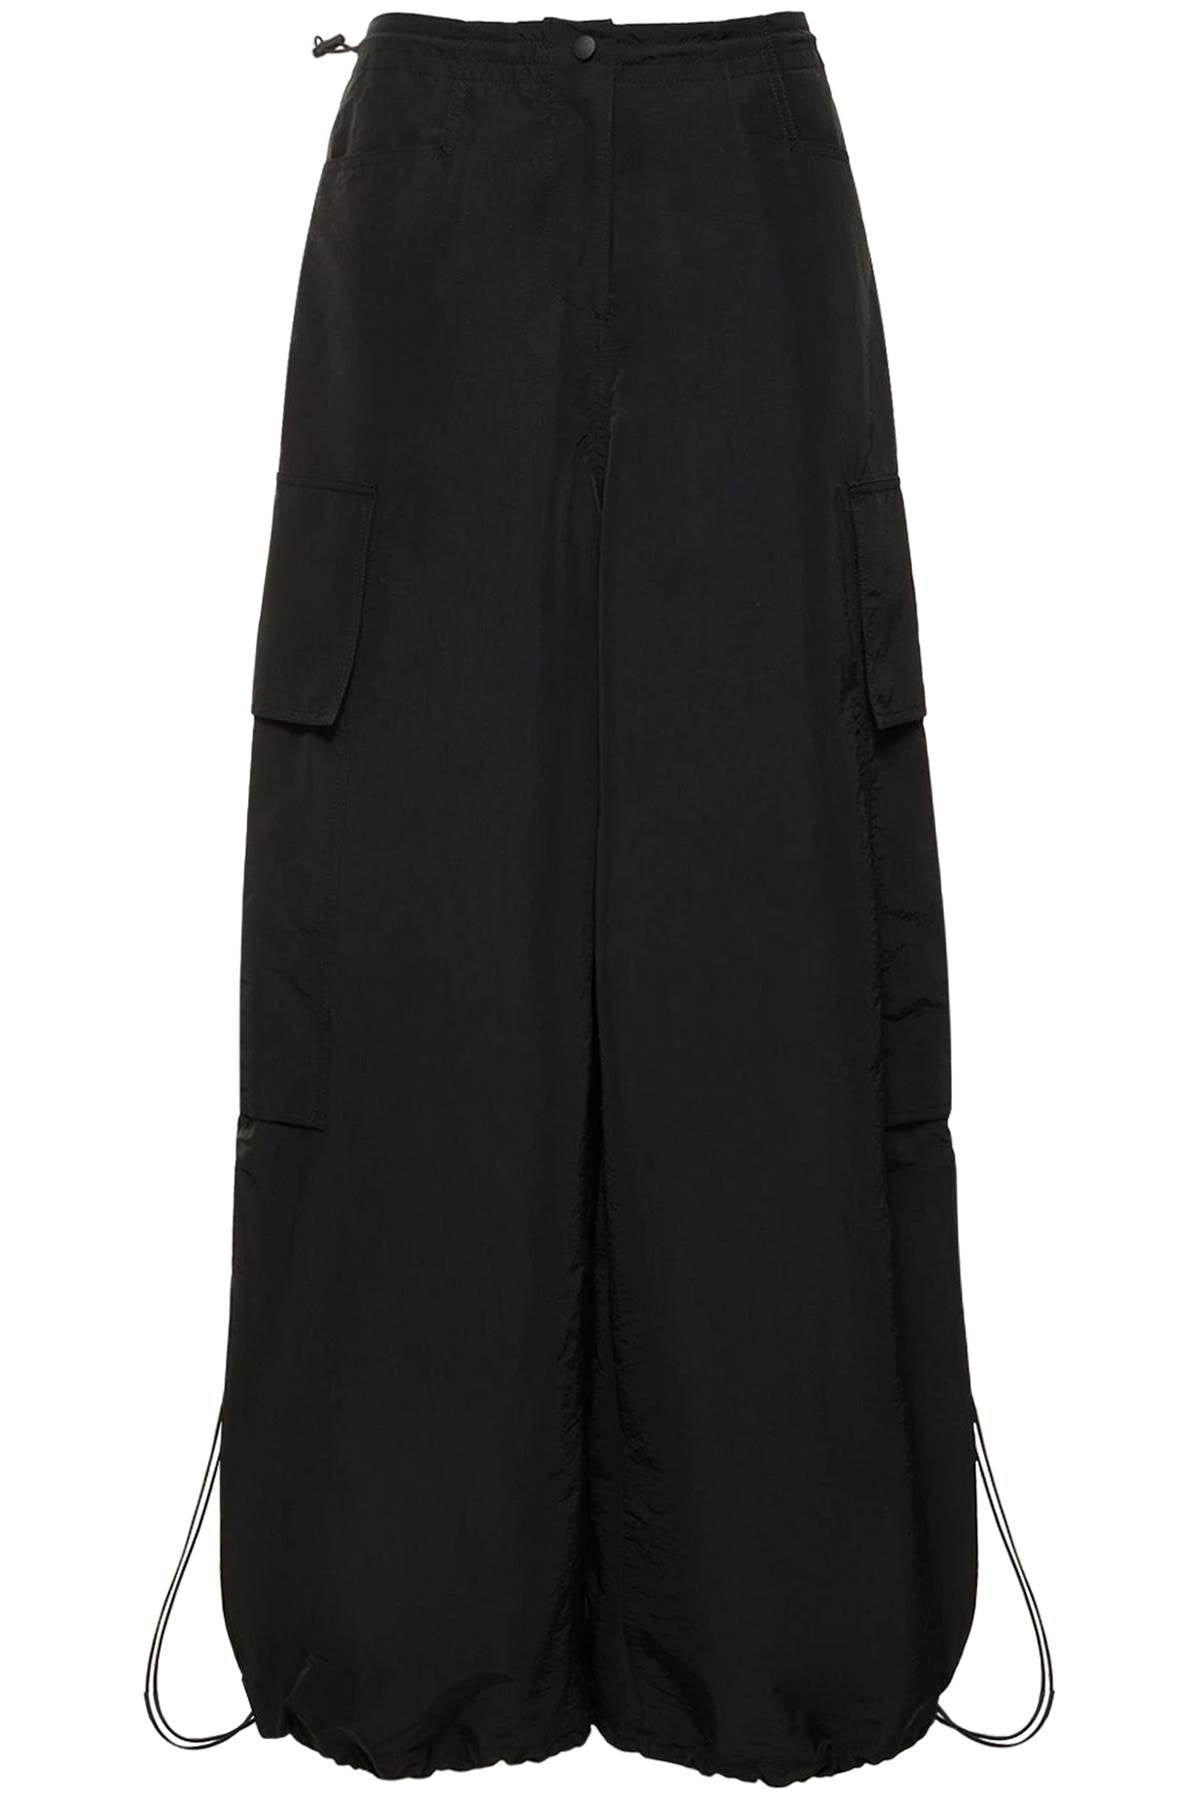 PALM ANGELS Black Parachute Pants for Women - Lightweight and Stylish for FW24 Season